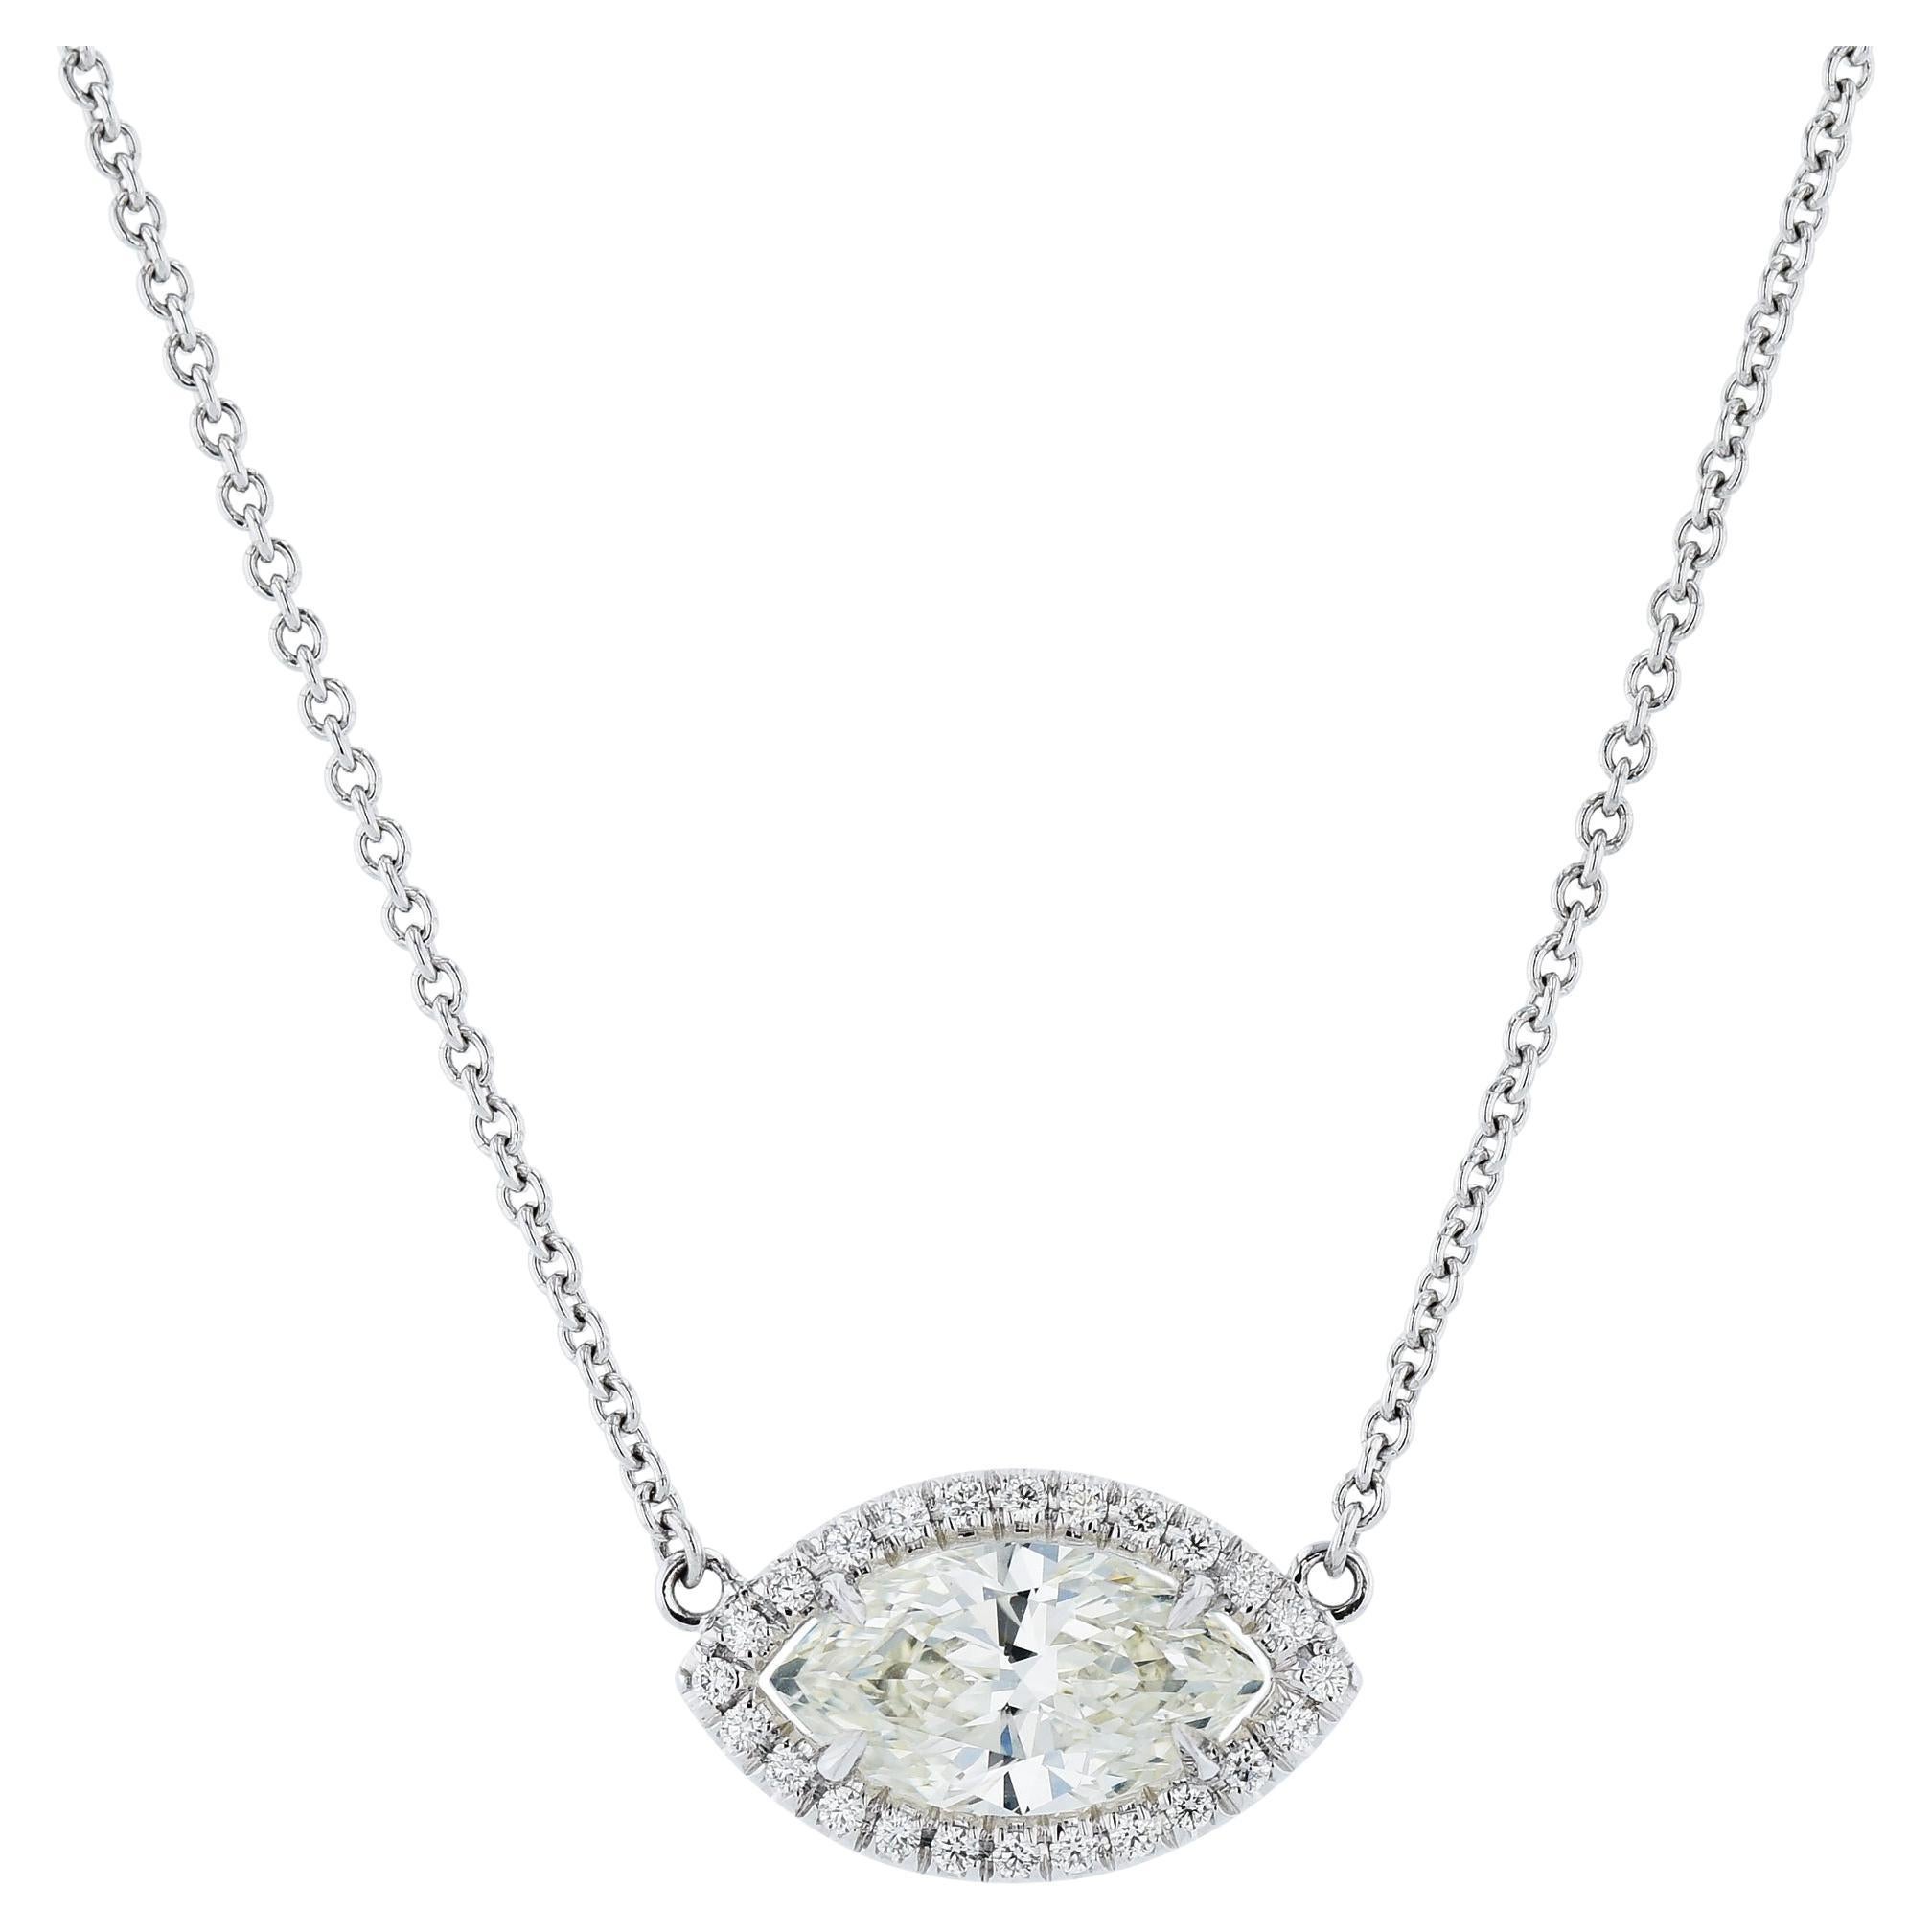 Handmade White Gold Diamond Pave Pendant Necklace For Sale